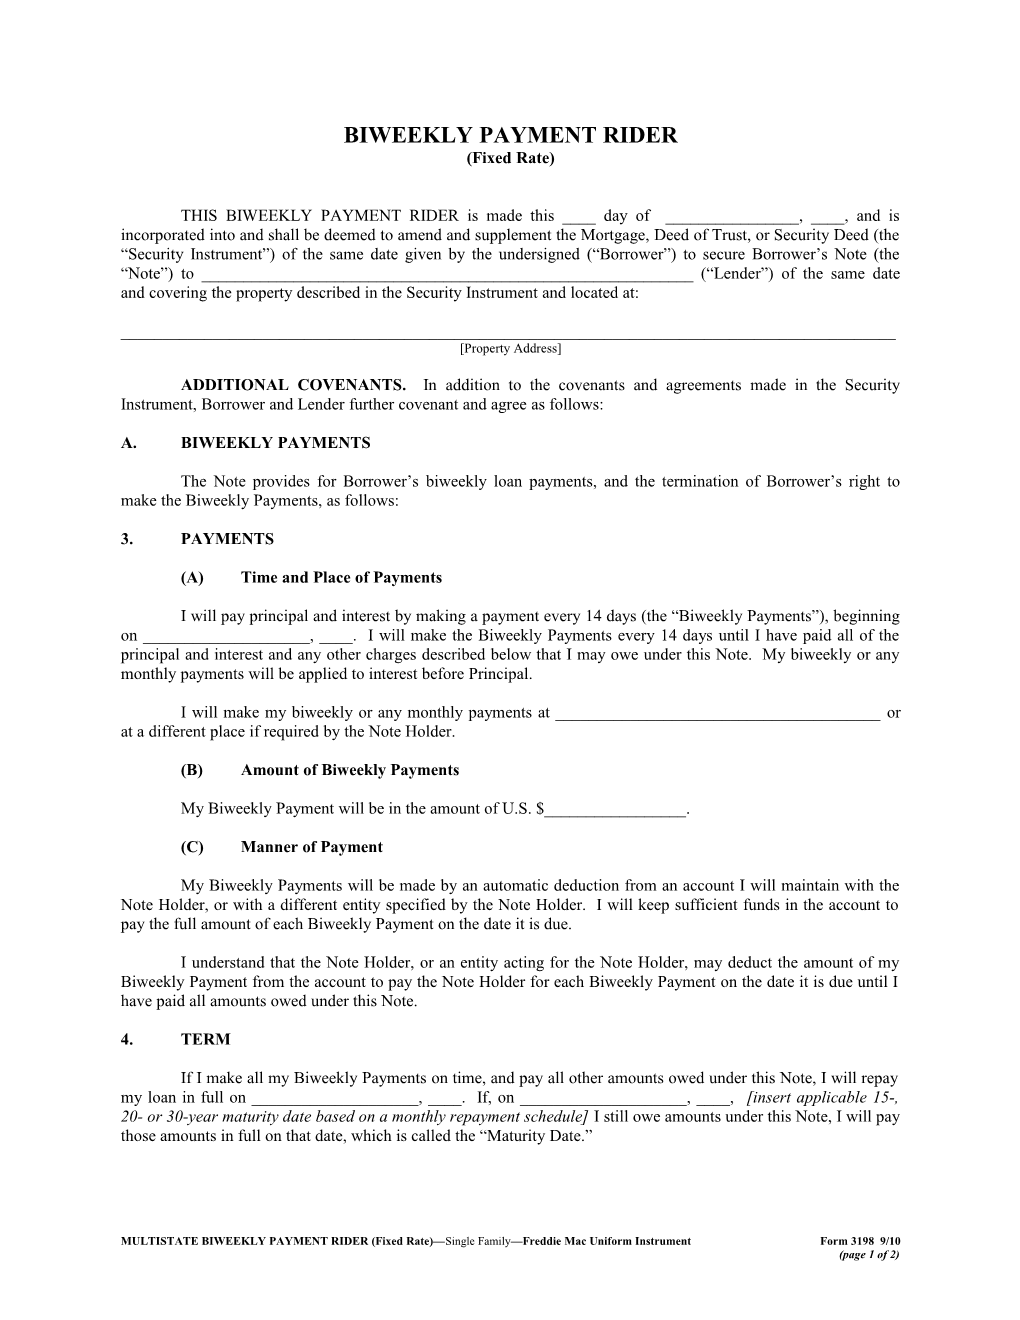 Multistate Riders and Addenda (Form 3177): Word